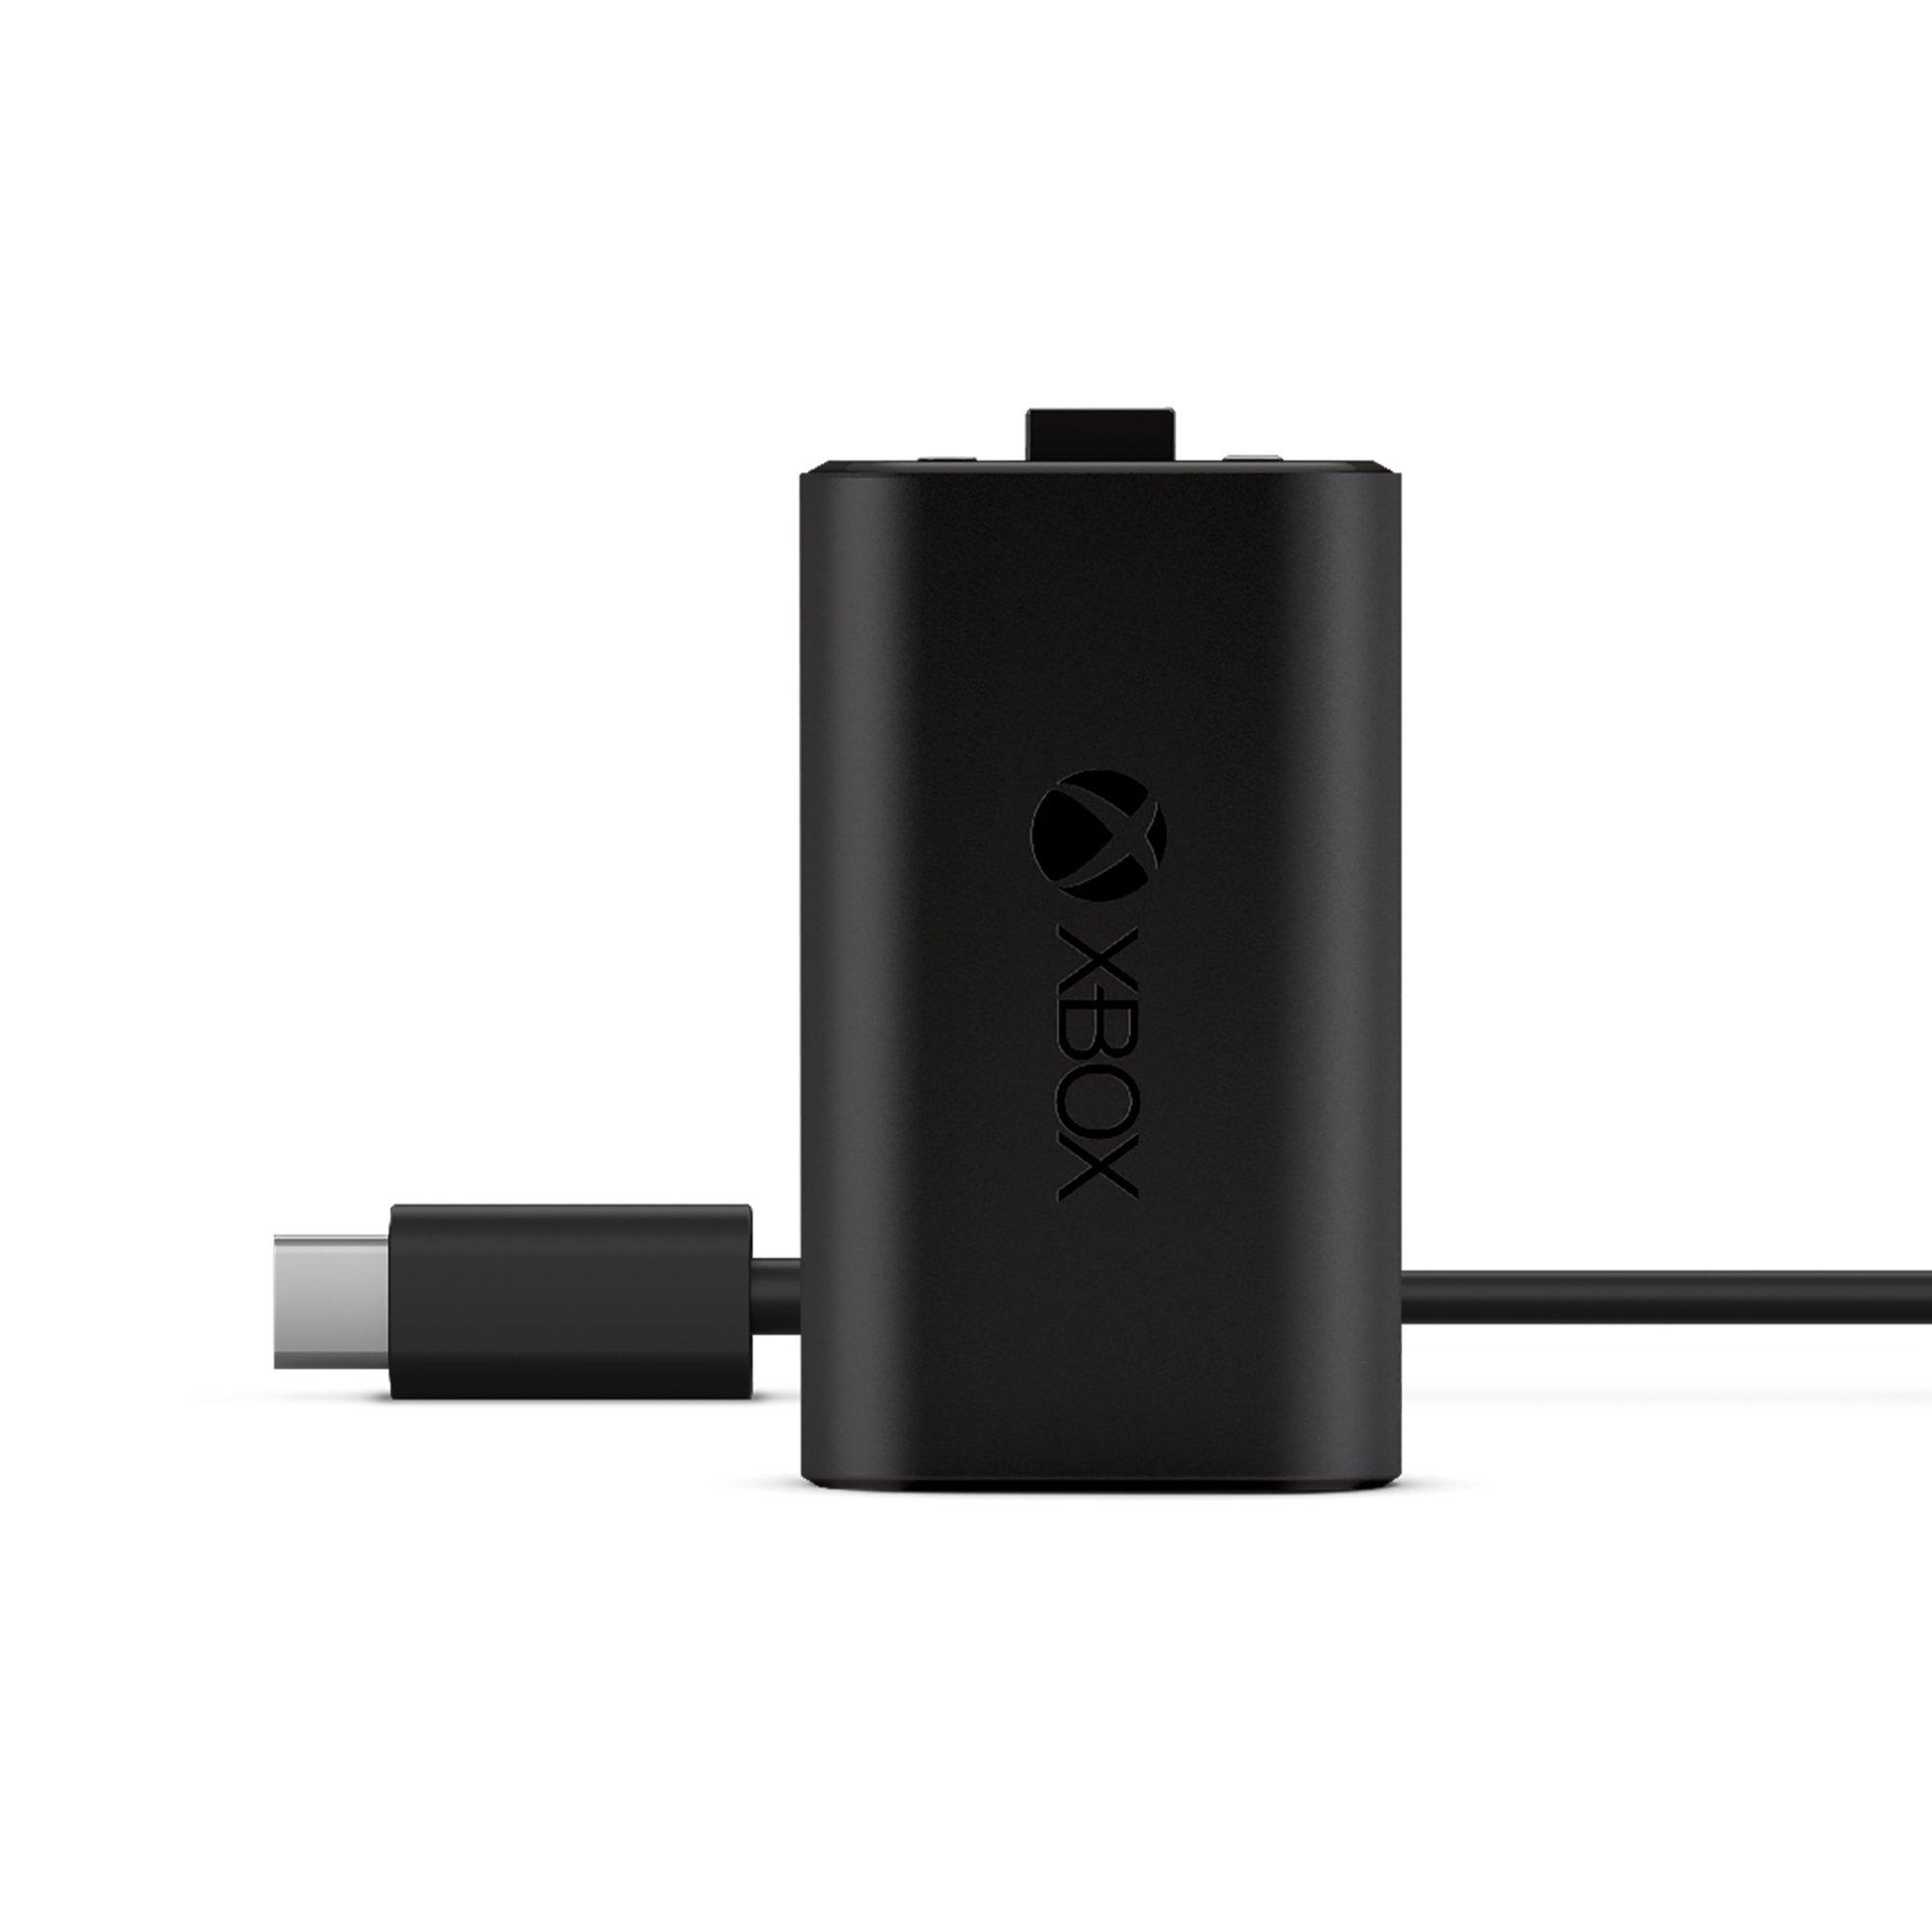 xbox one play & charge kit